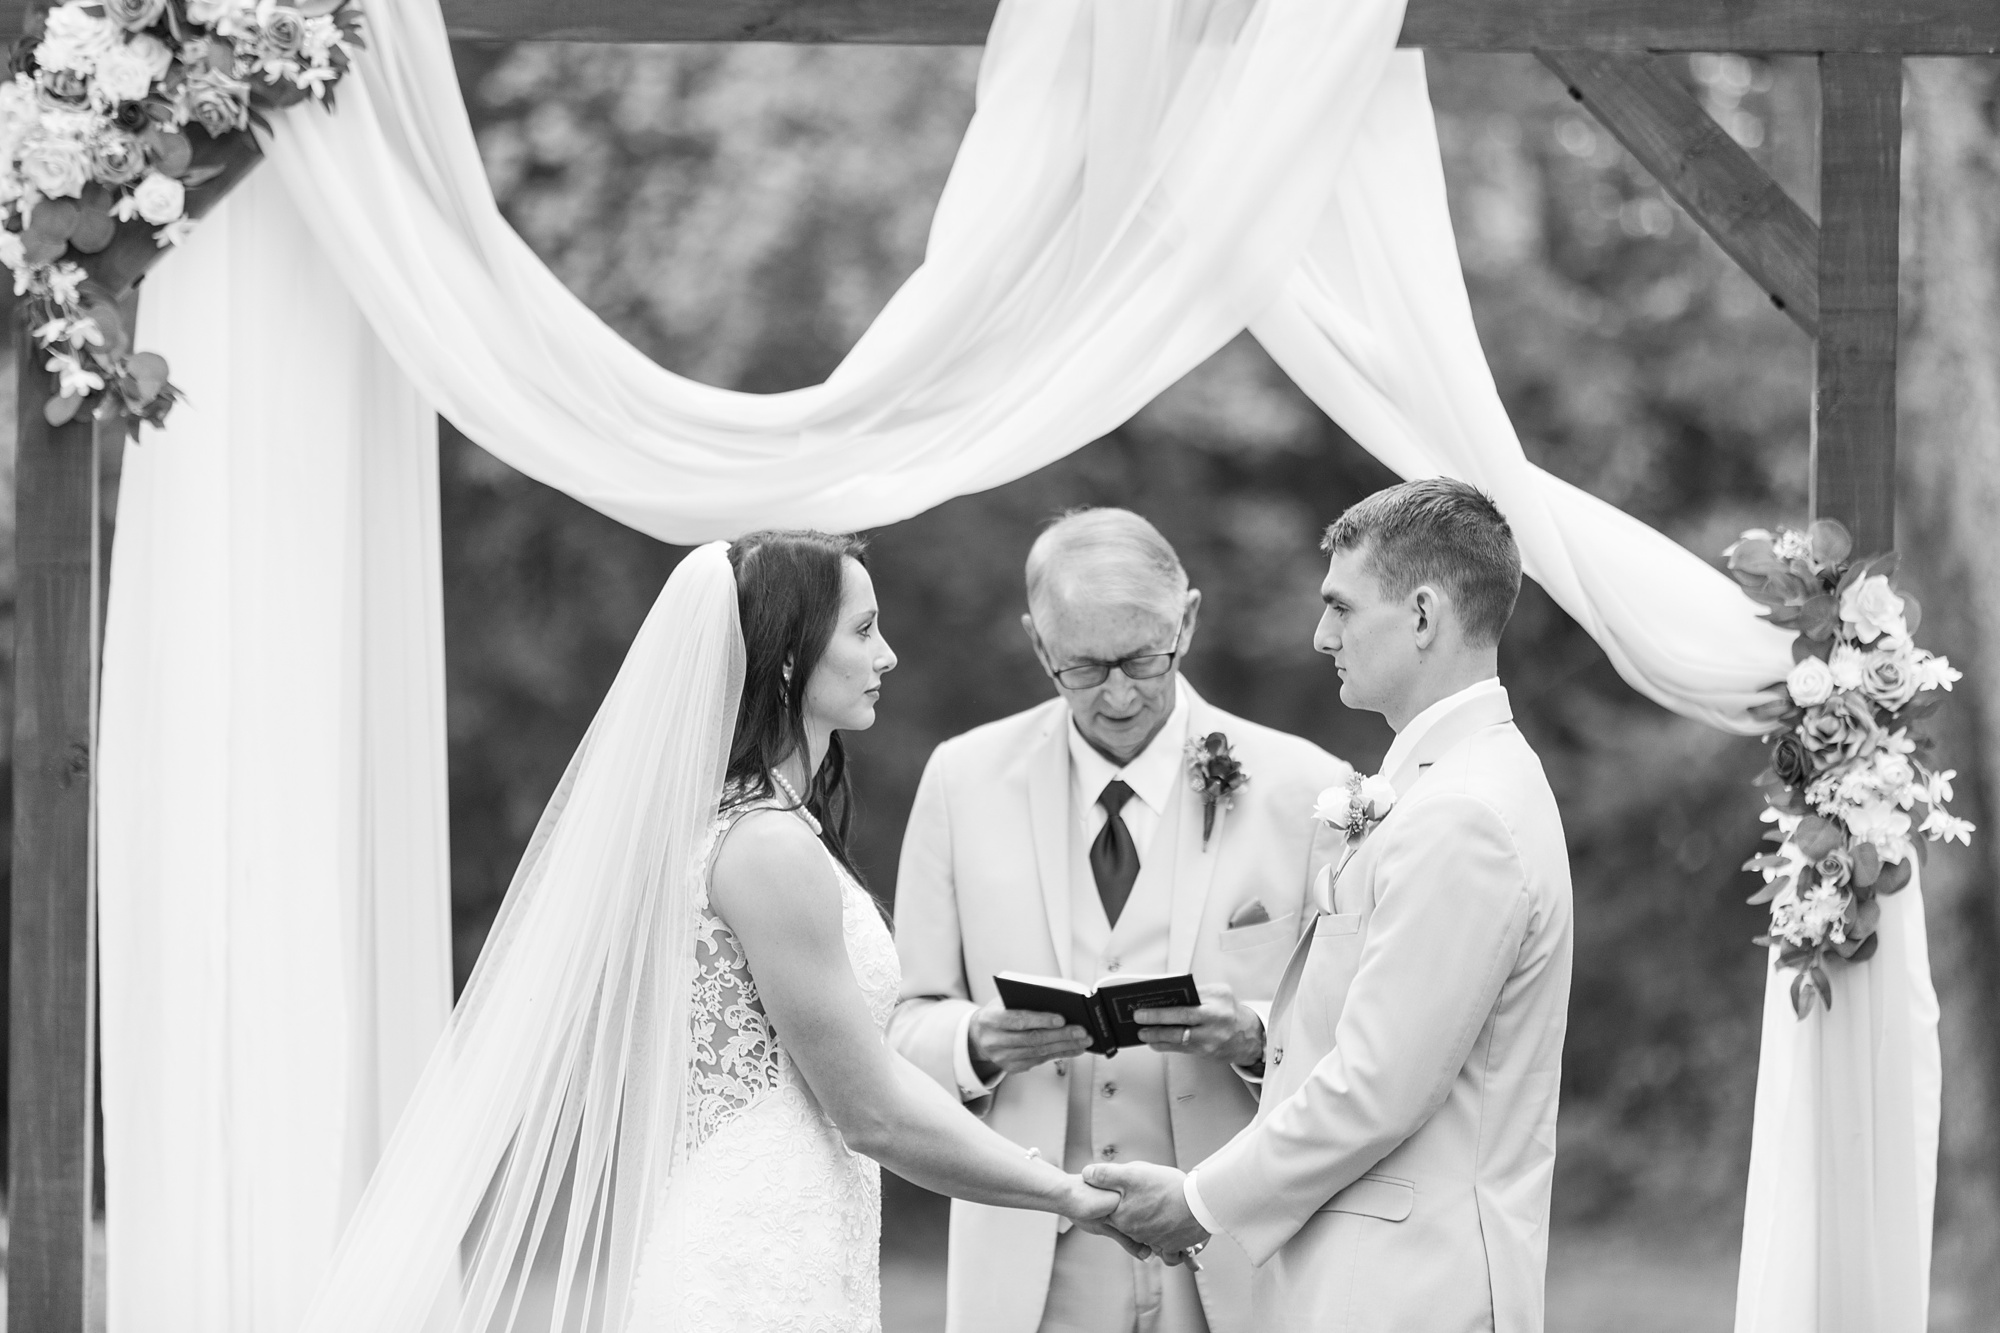 backyard wedding ceremony with father officiating